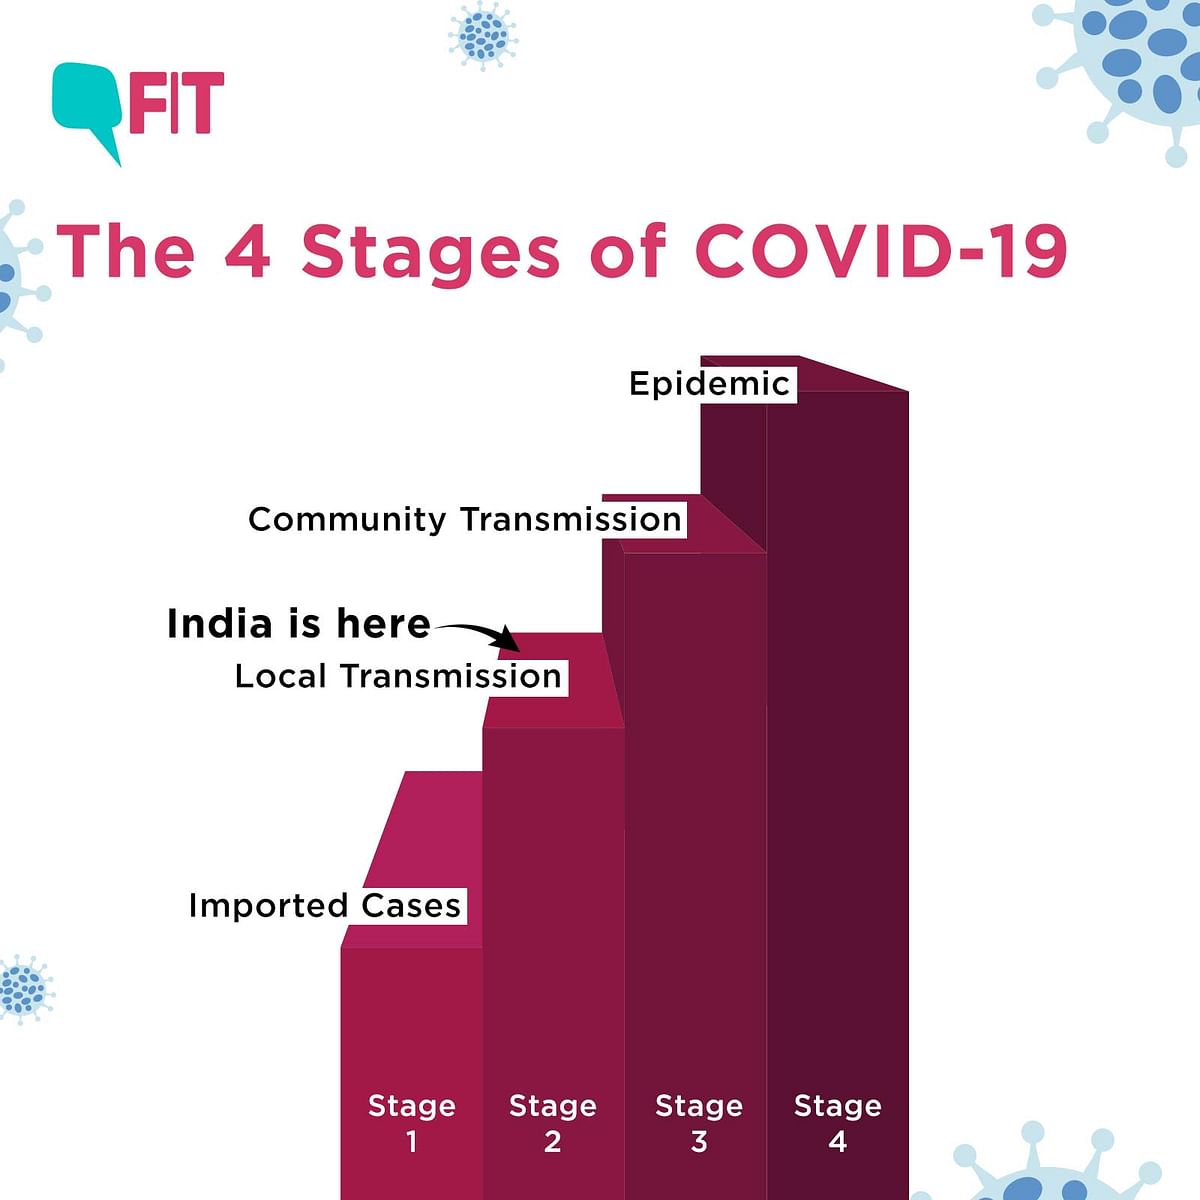 Explained: The 4 Stages of COVID-19